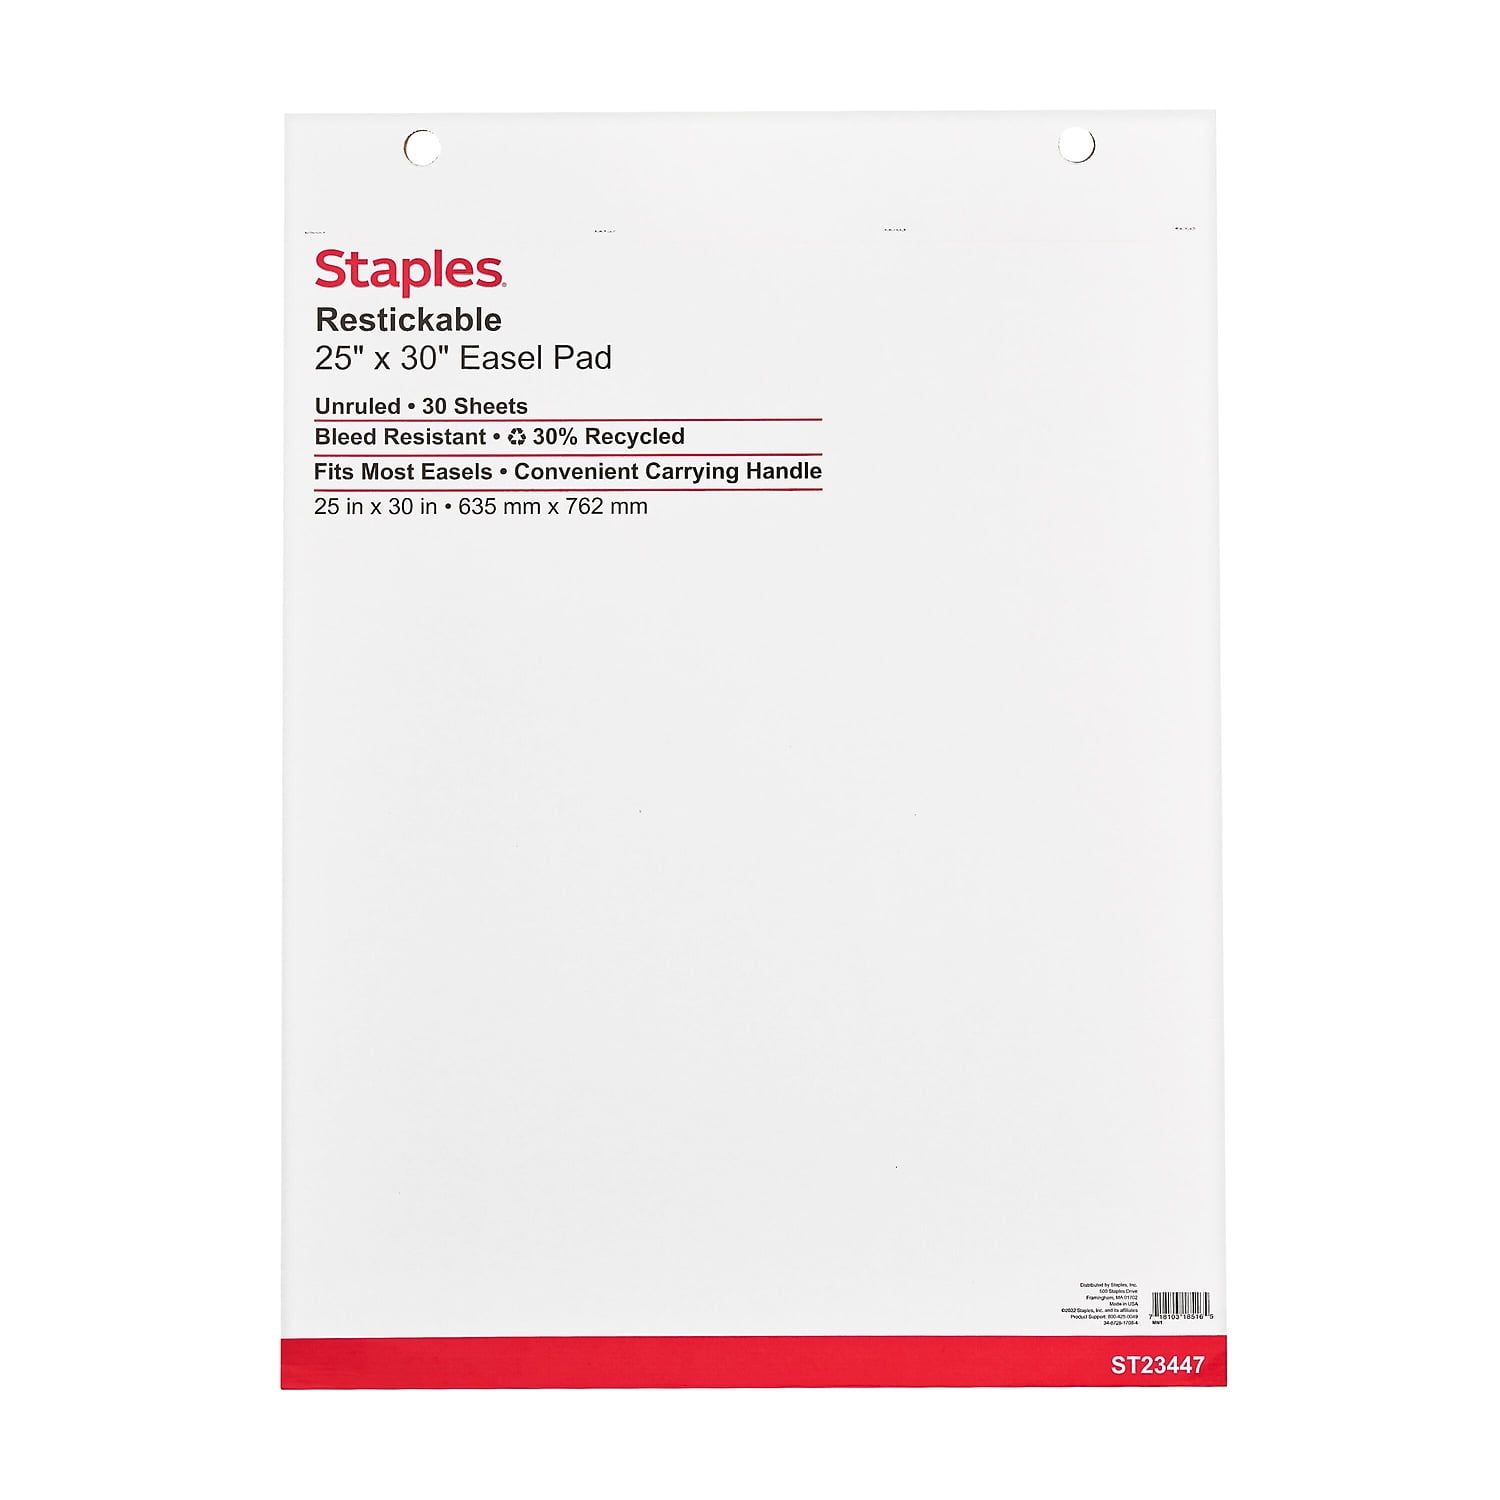 Staples Stickies Easel Pads 25 x 30 White 30 Sheets/Pad 2 Pads/CT 958103